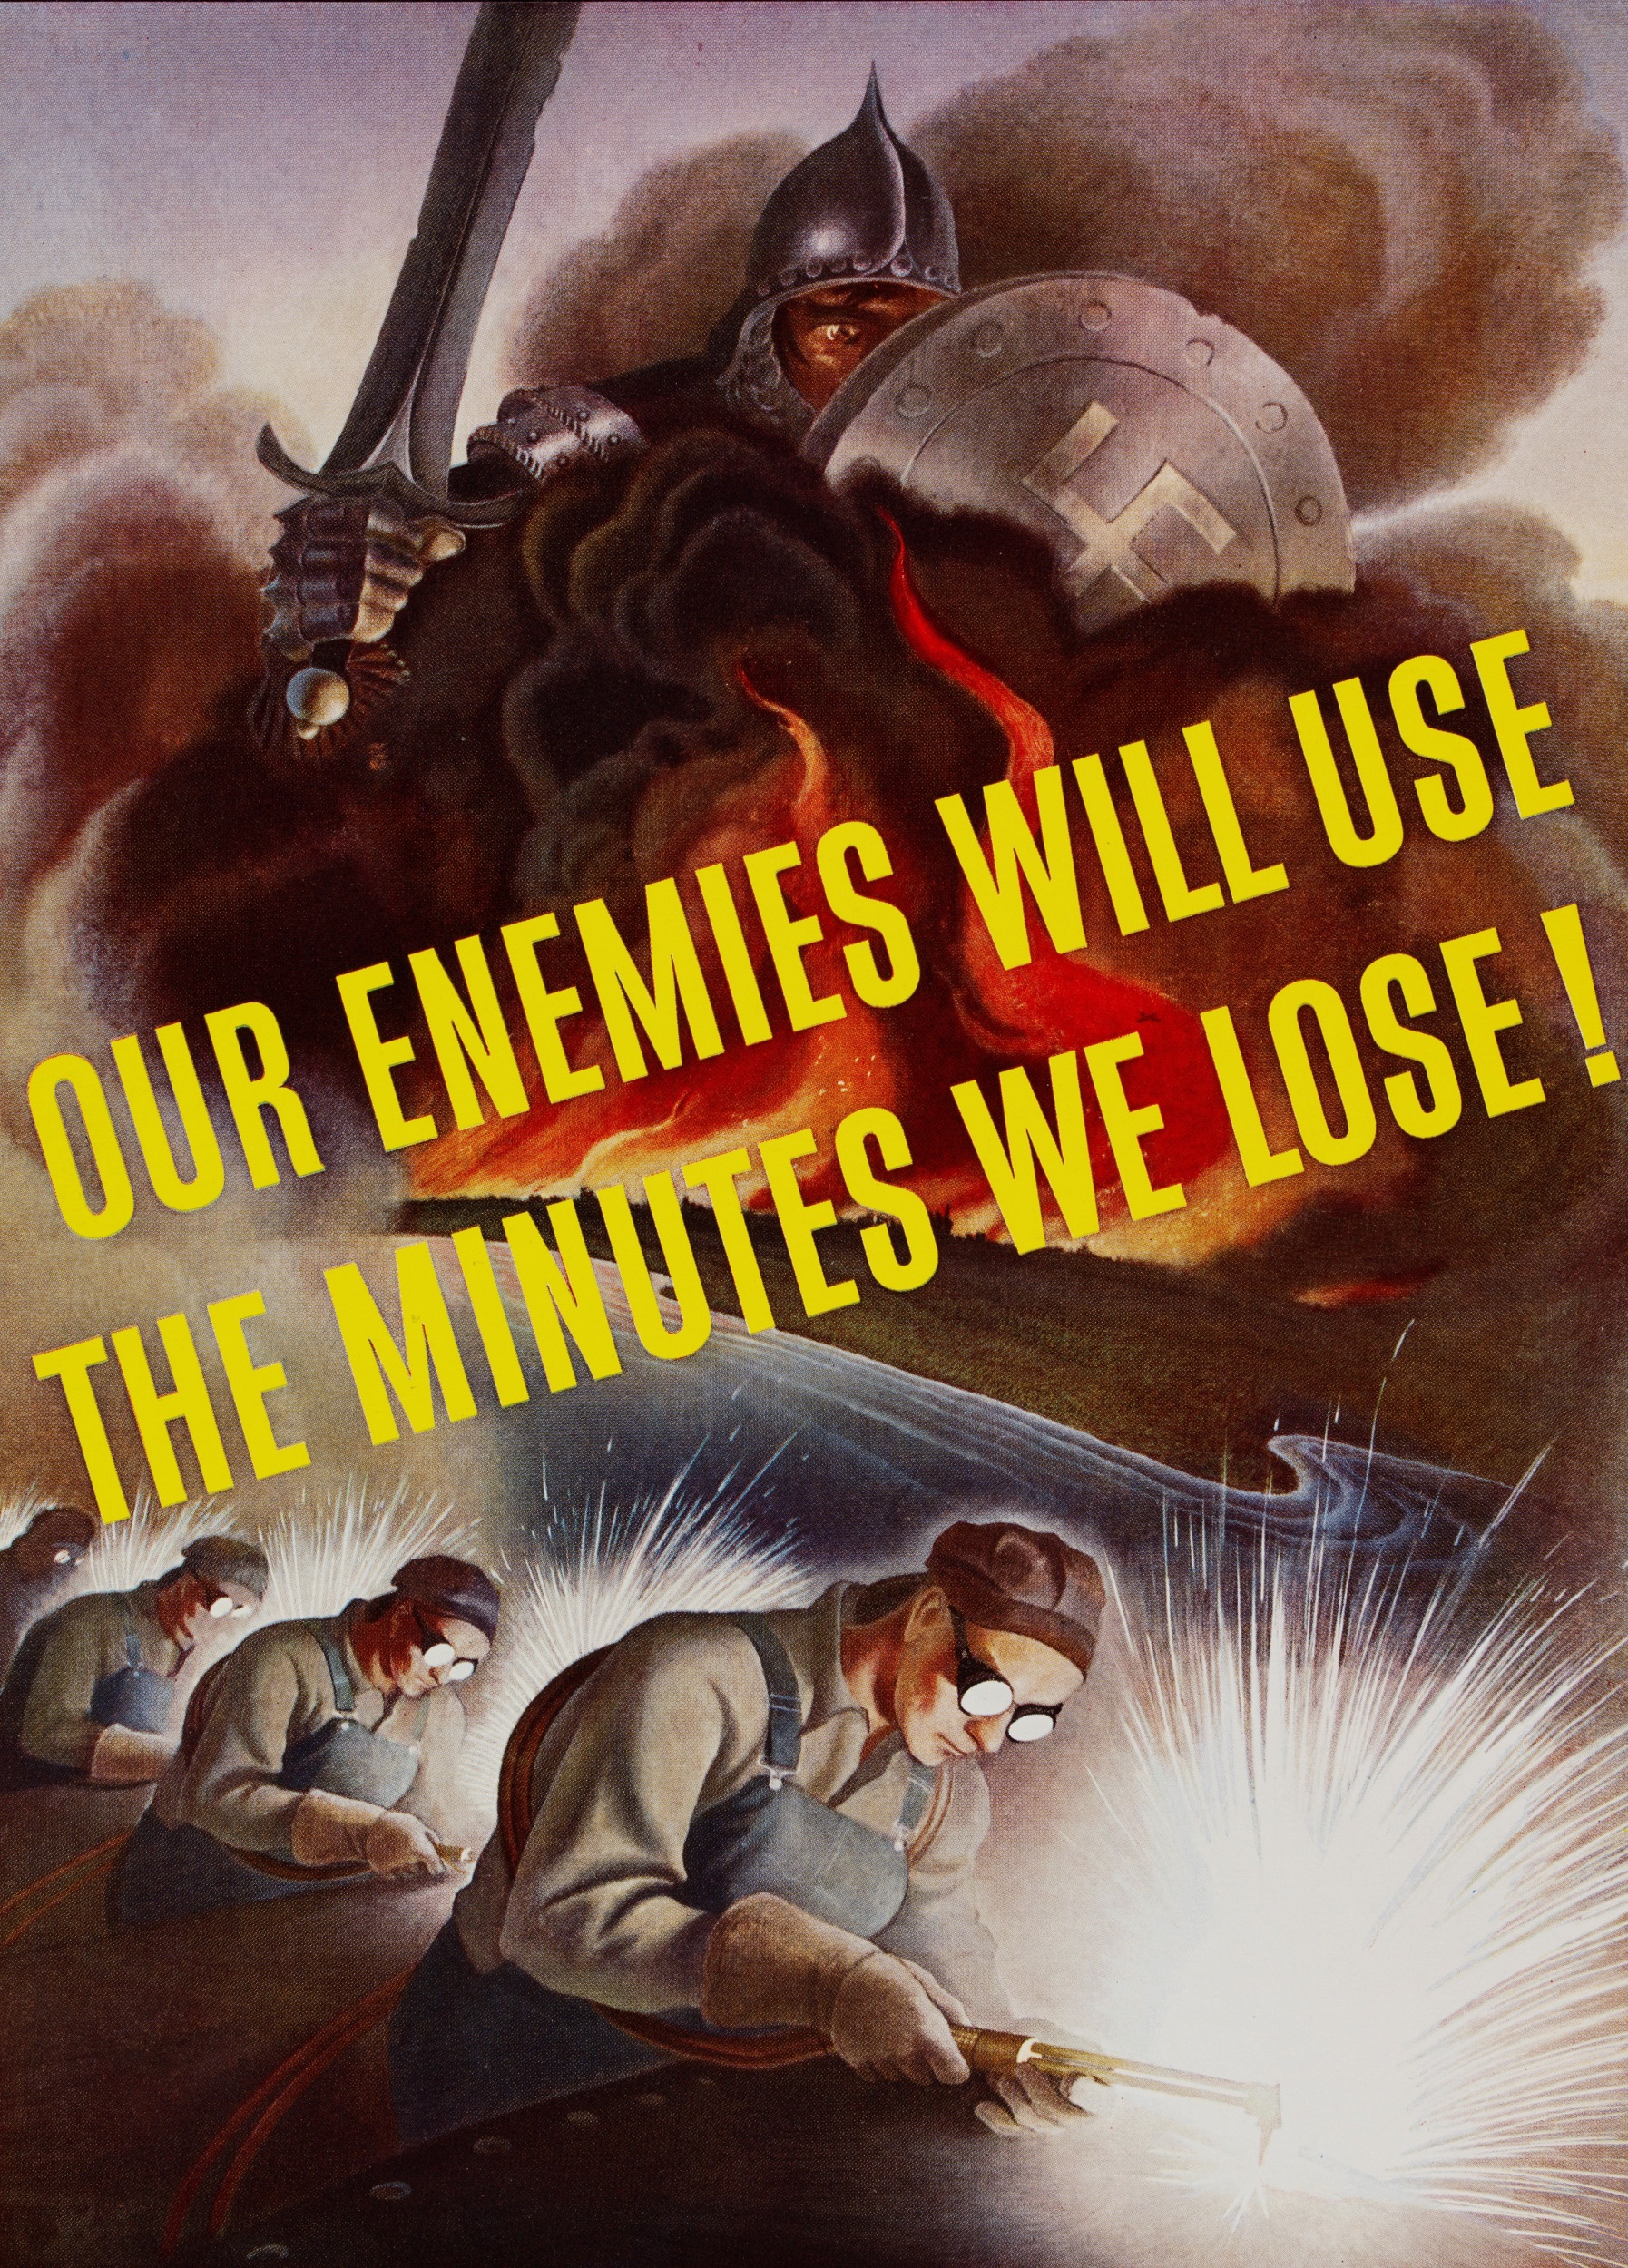 Poster with a knight holding a shield with a swastika on it and a sword, above three welders in overalls